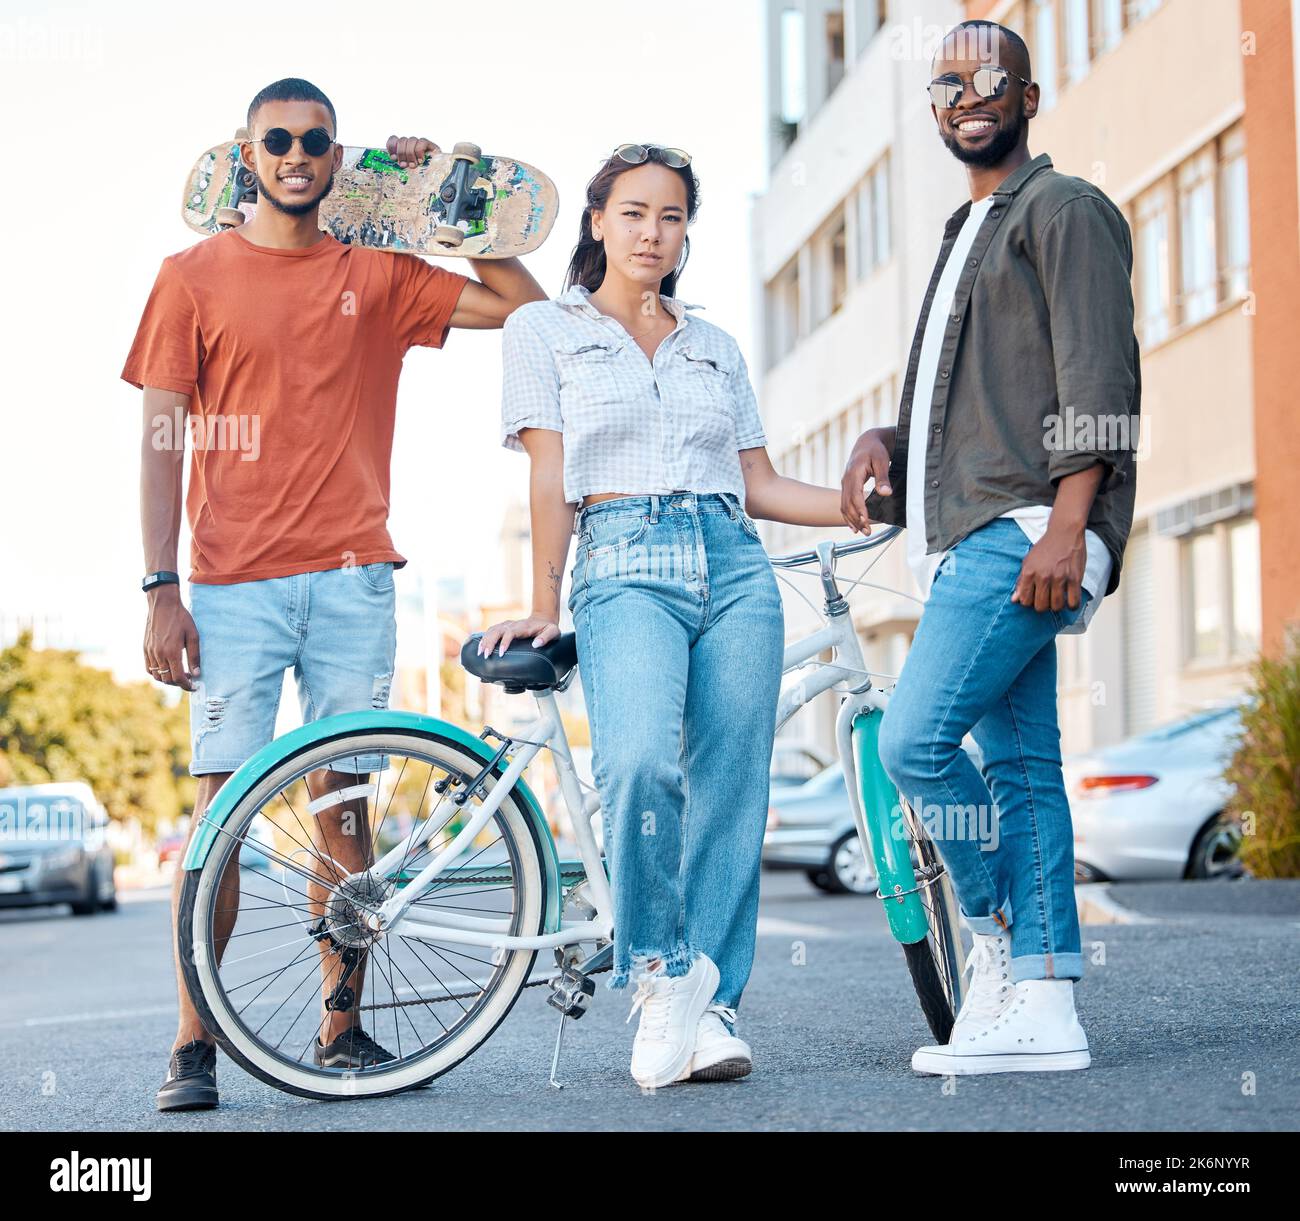 Fashion, Gen Z and skater friends portrait in road for hangout in Los Angeles neighbourhood. Skateboard, bike and diverse friendship with trendy Stock Photo